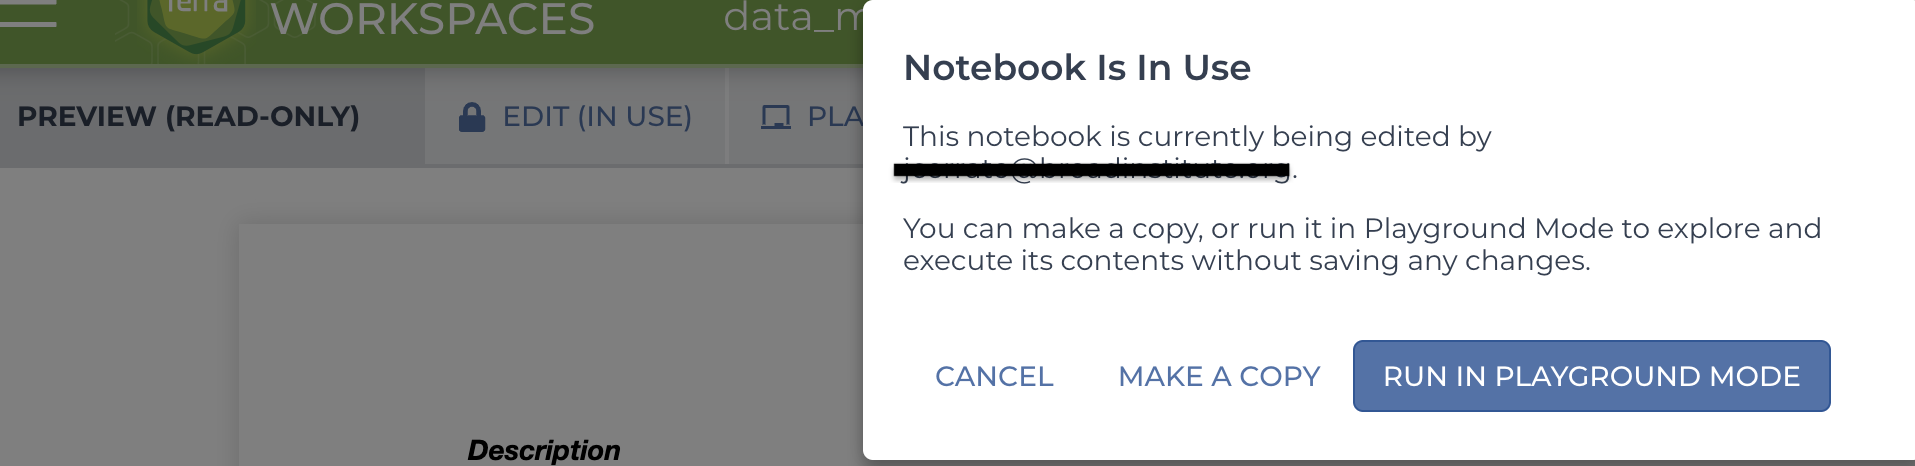 Pop-up message that lets a user know that the Notebook Is In Use, with options to Make a Copy or Run in Playground Mode